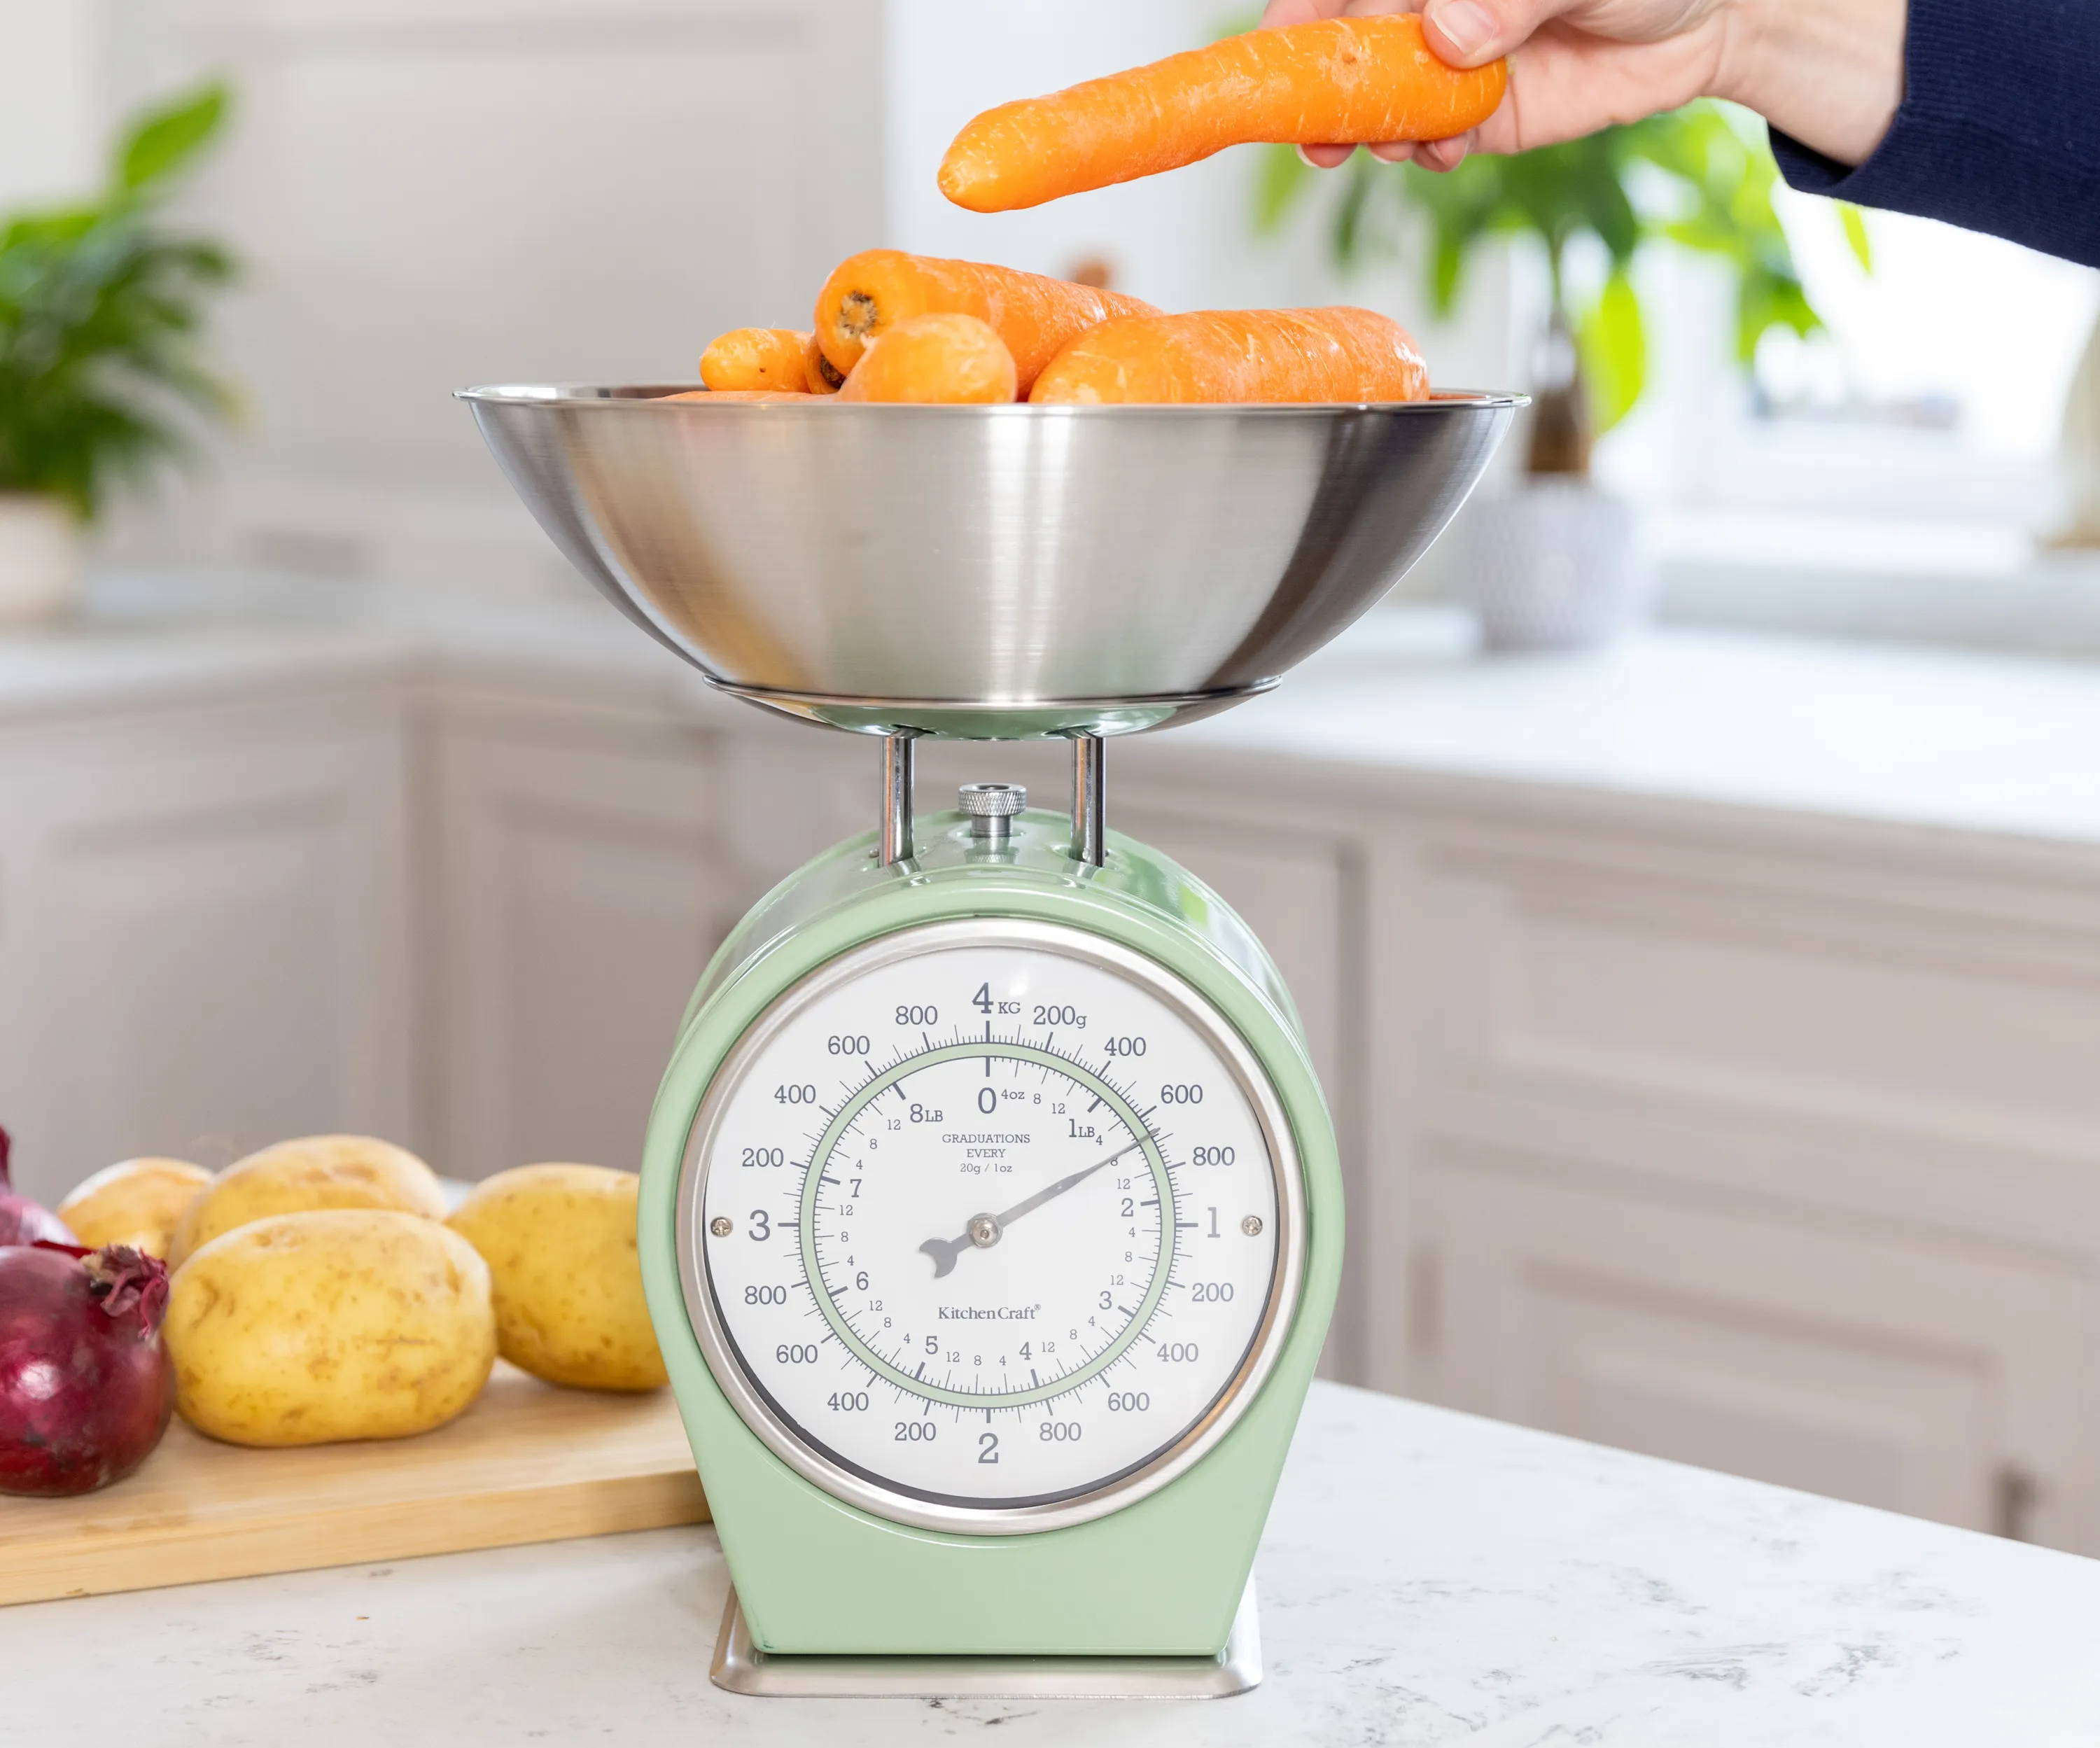 The 10 Best Kitchen Scales for Mastering Any Recipe